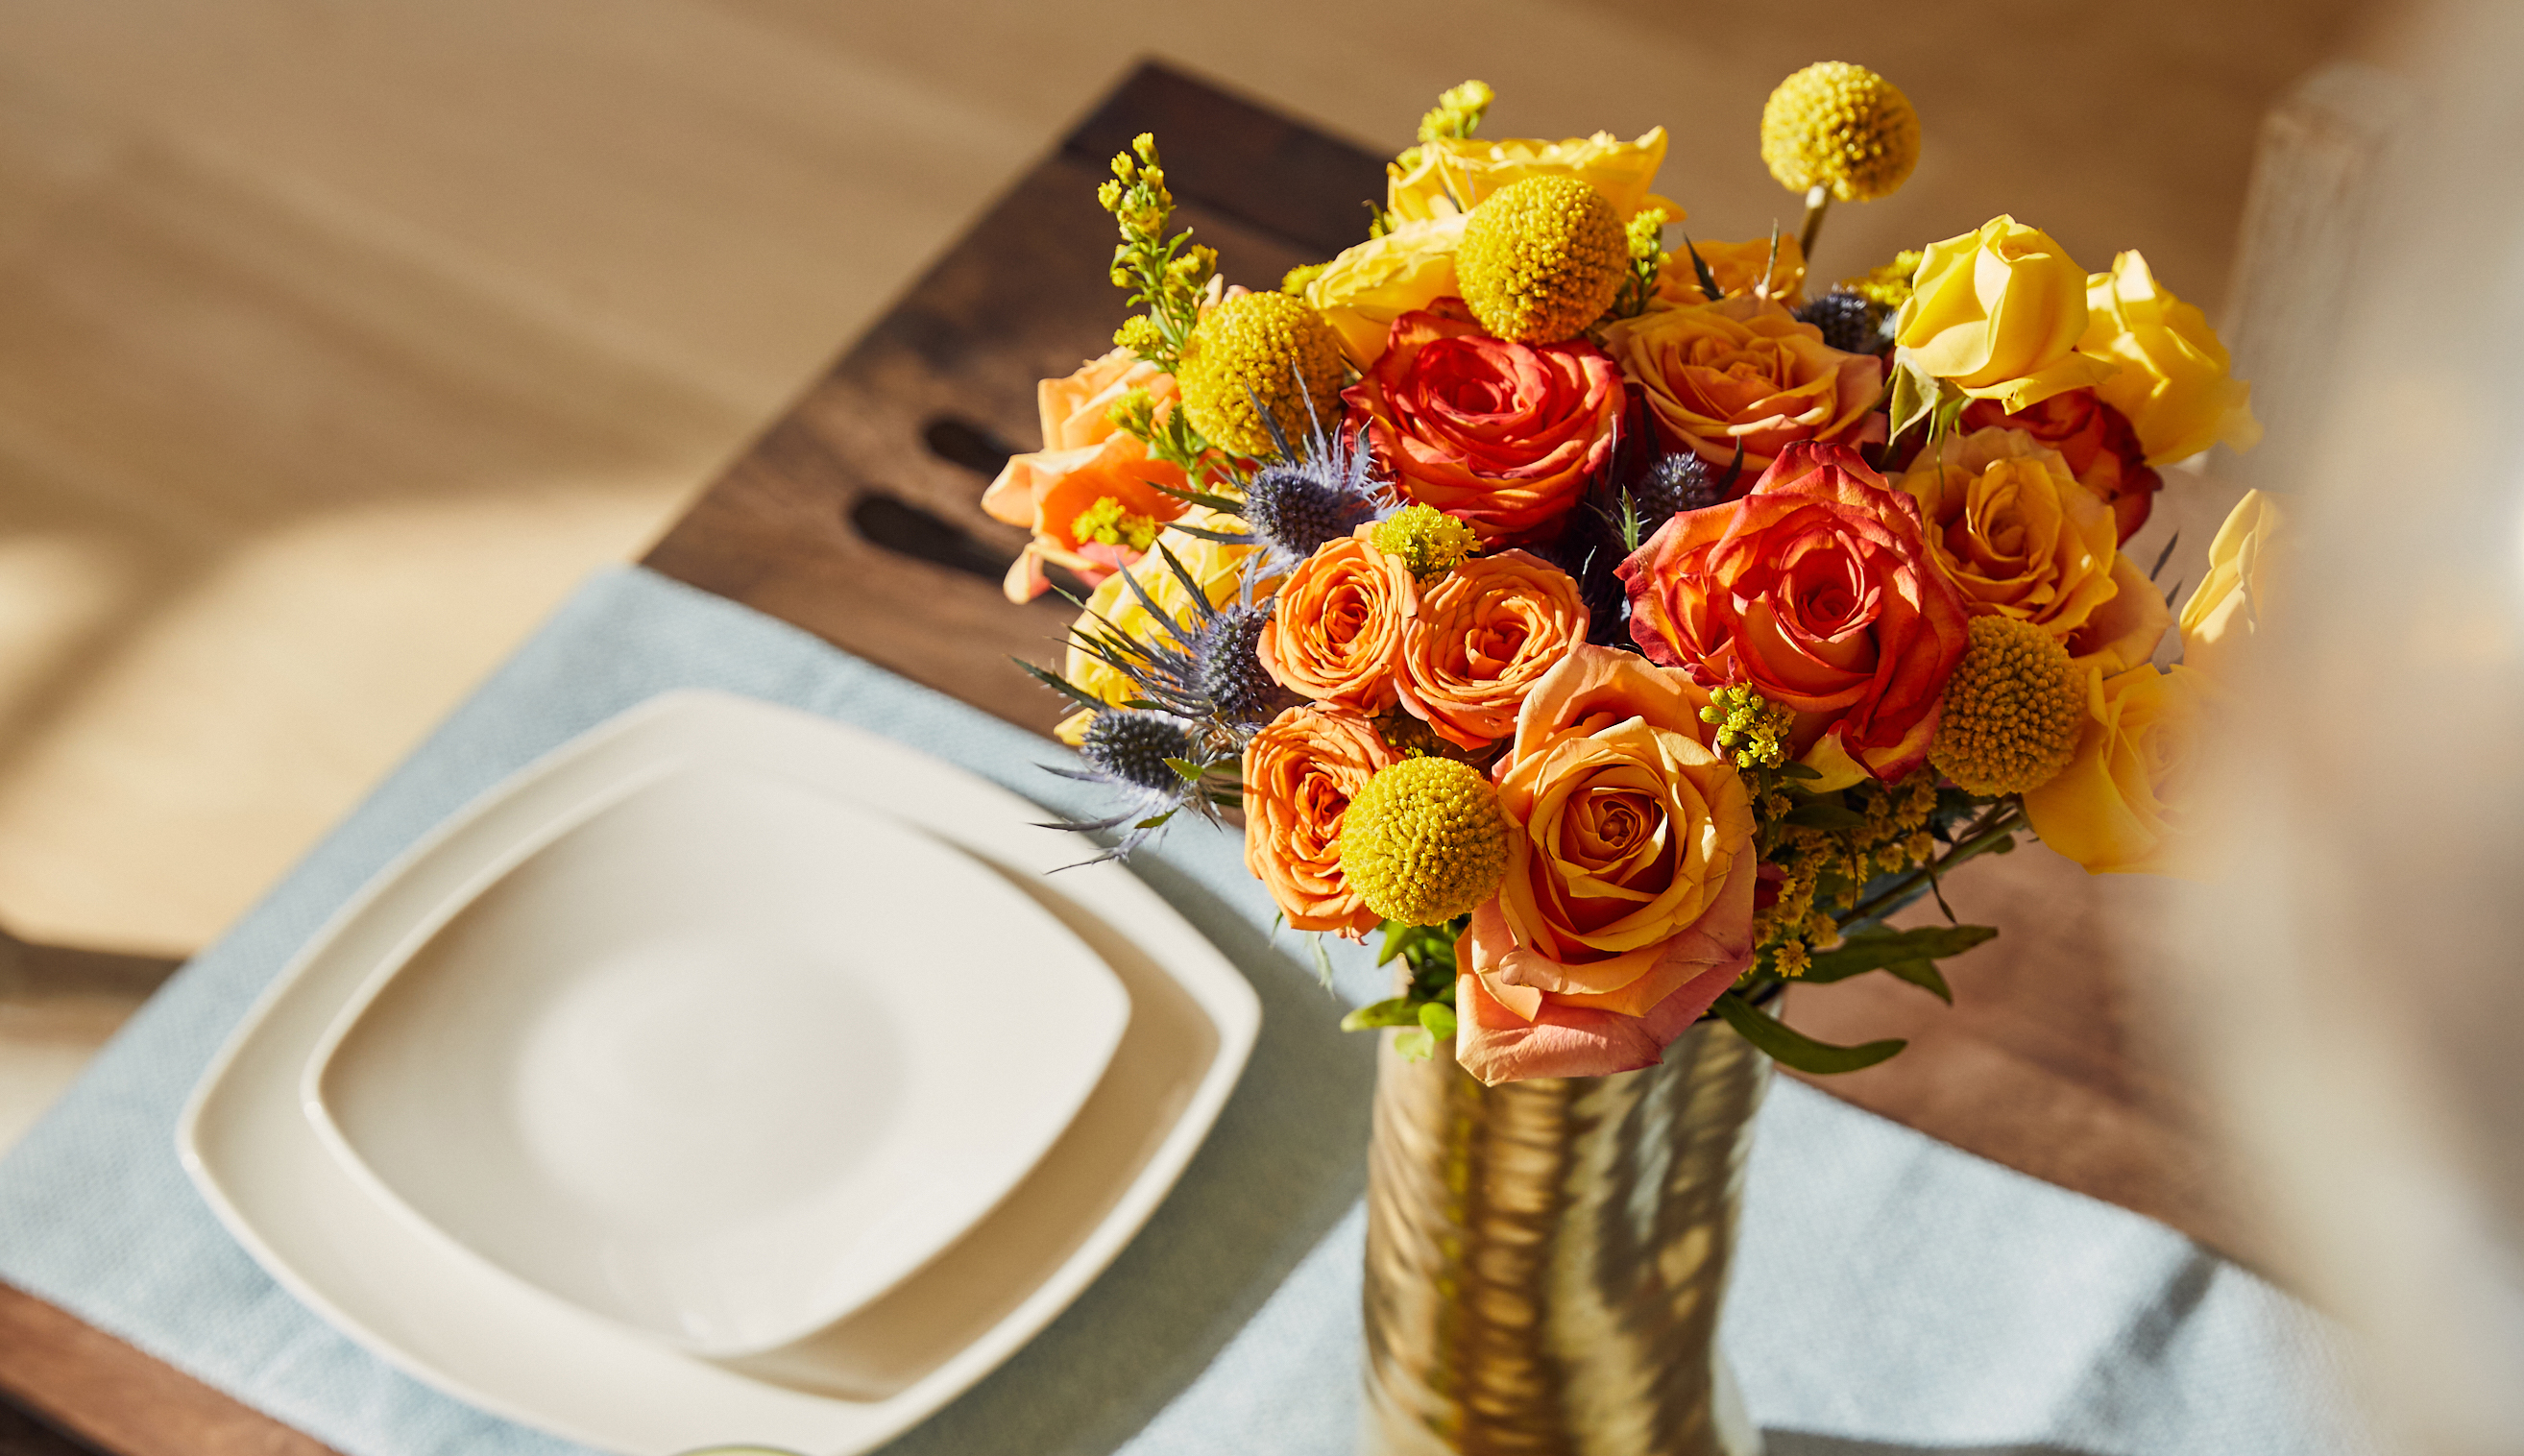 Table set with a lively summer bouquet